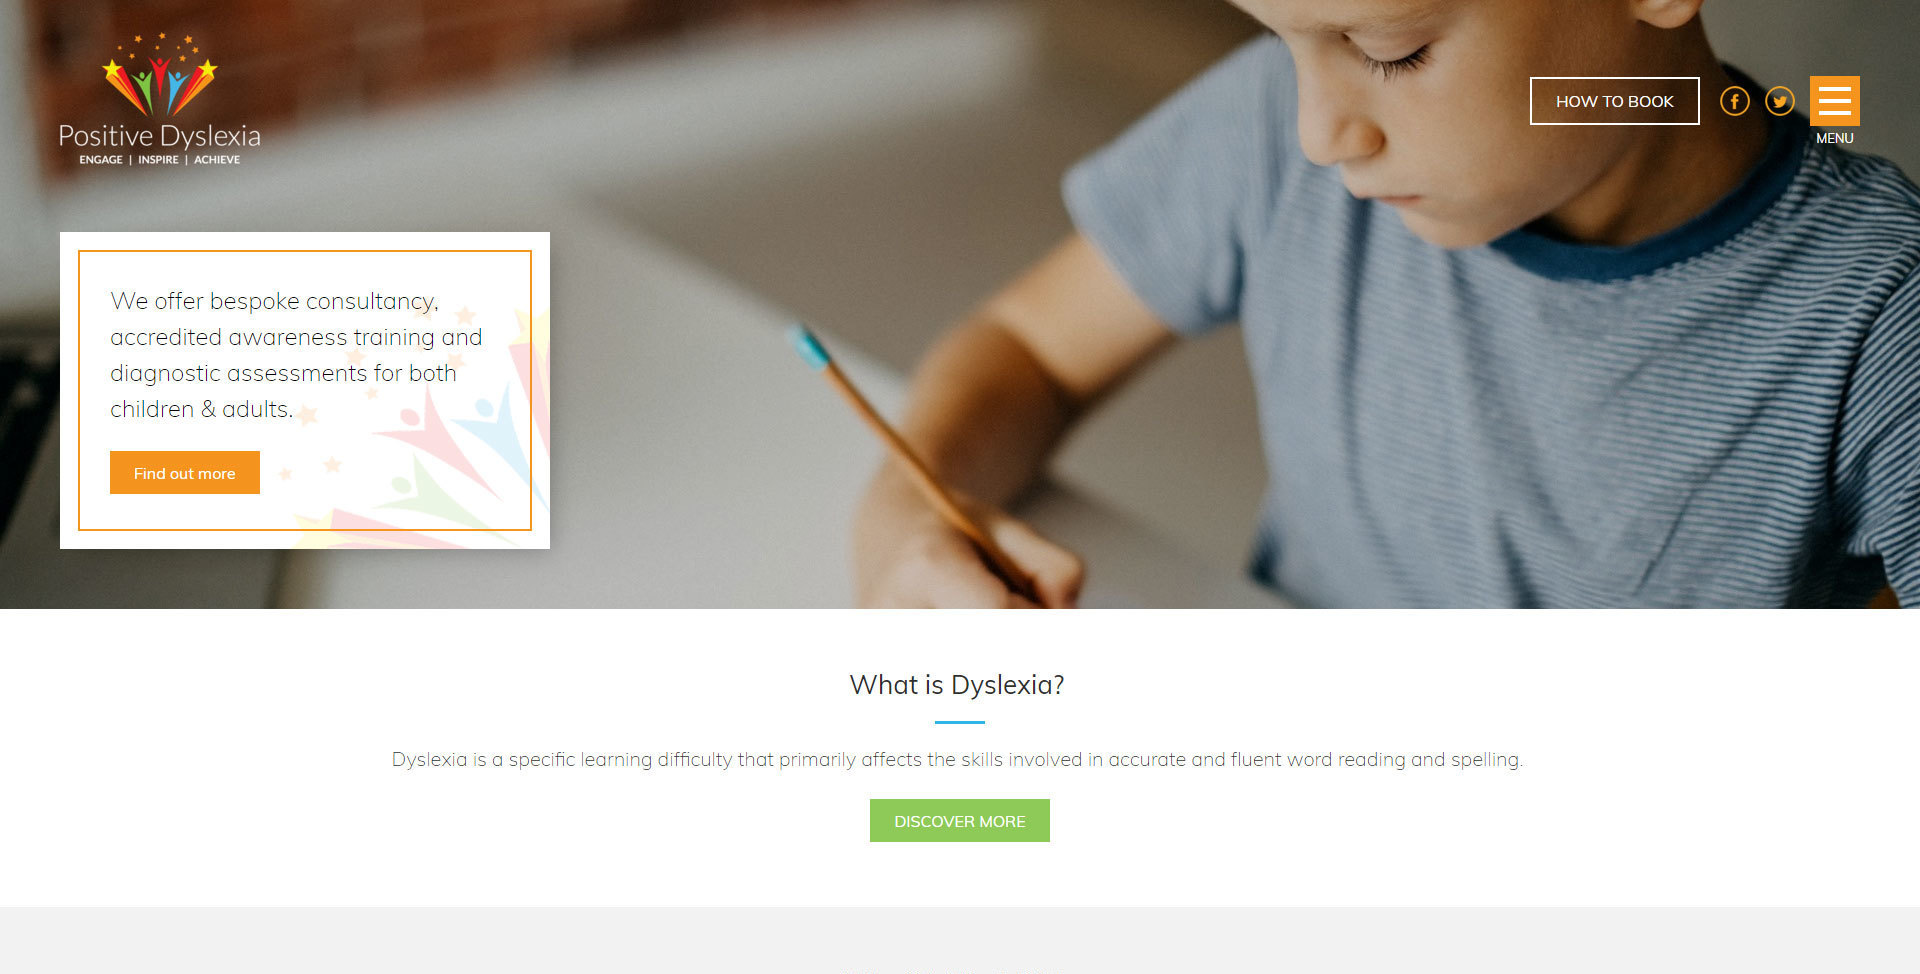 A website design to support people with dyslexia.